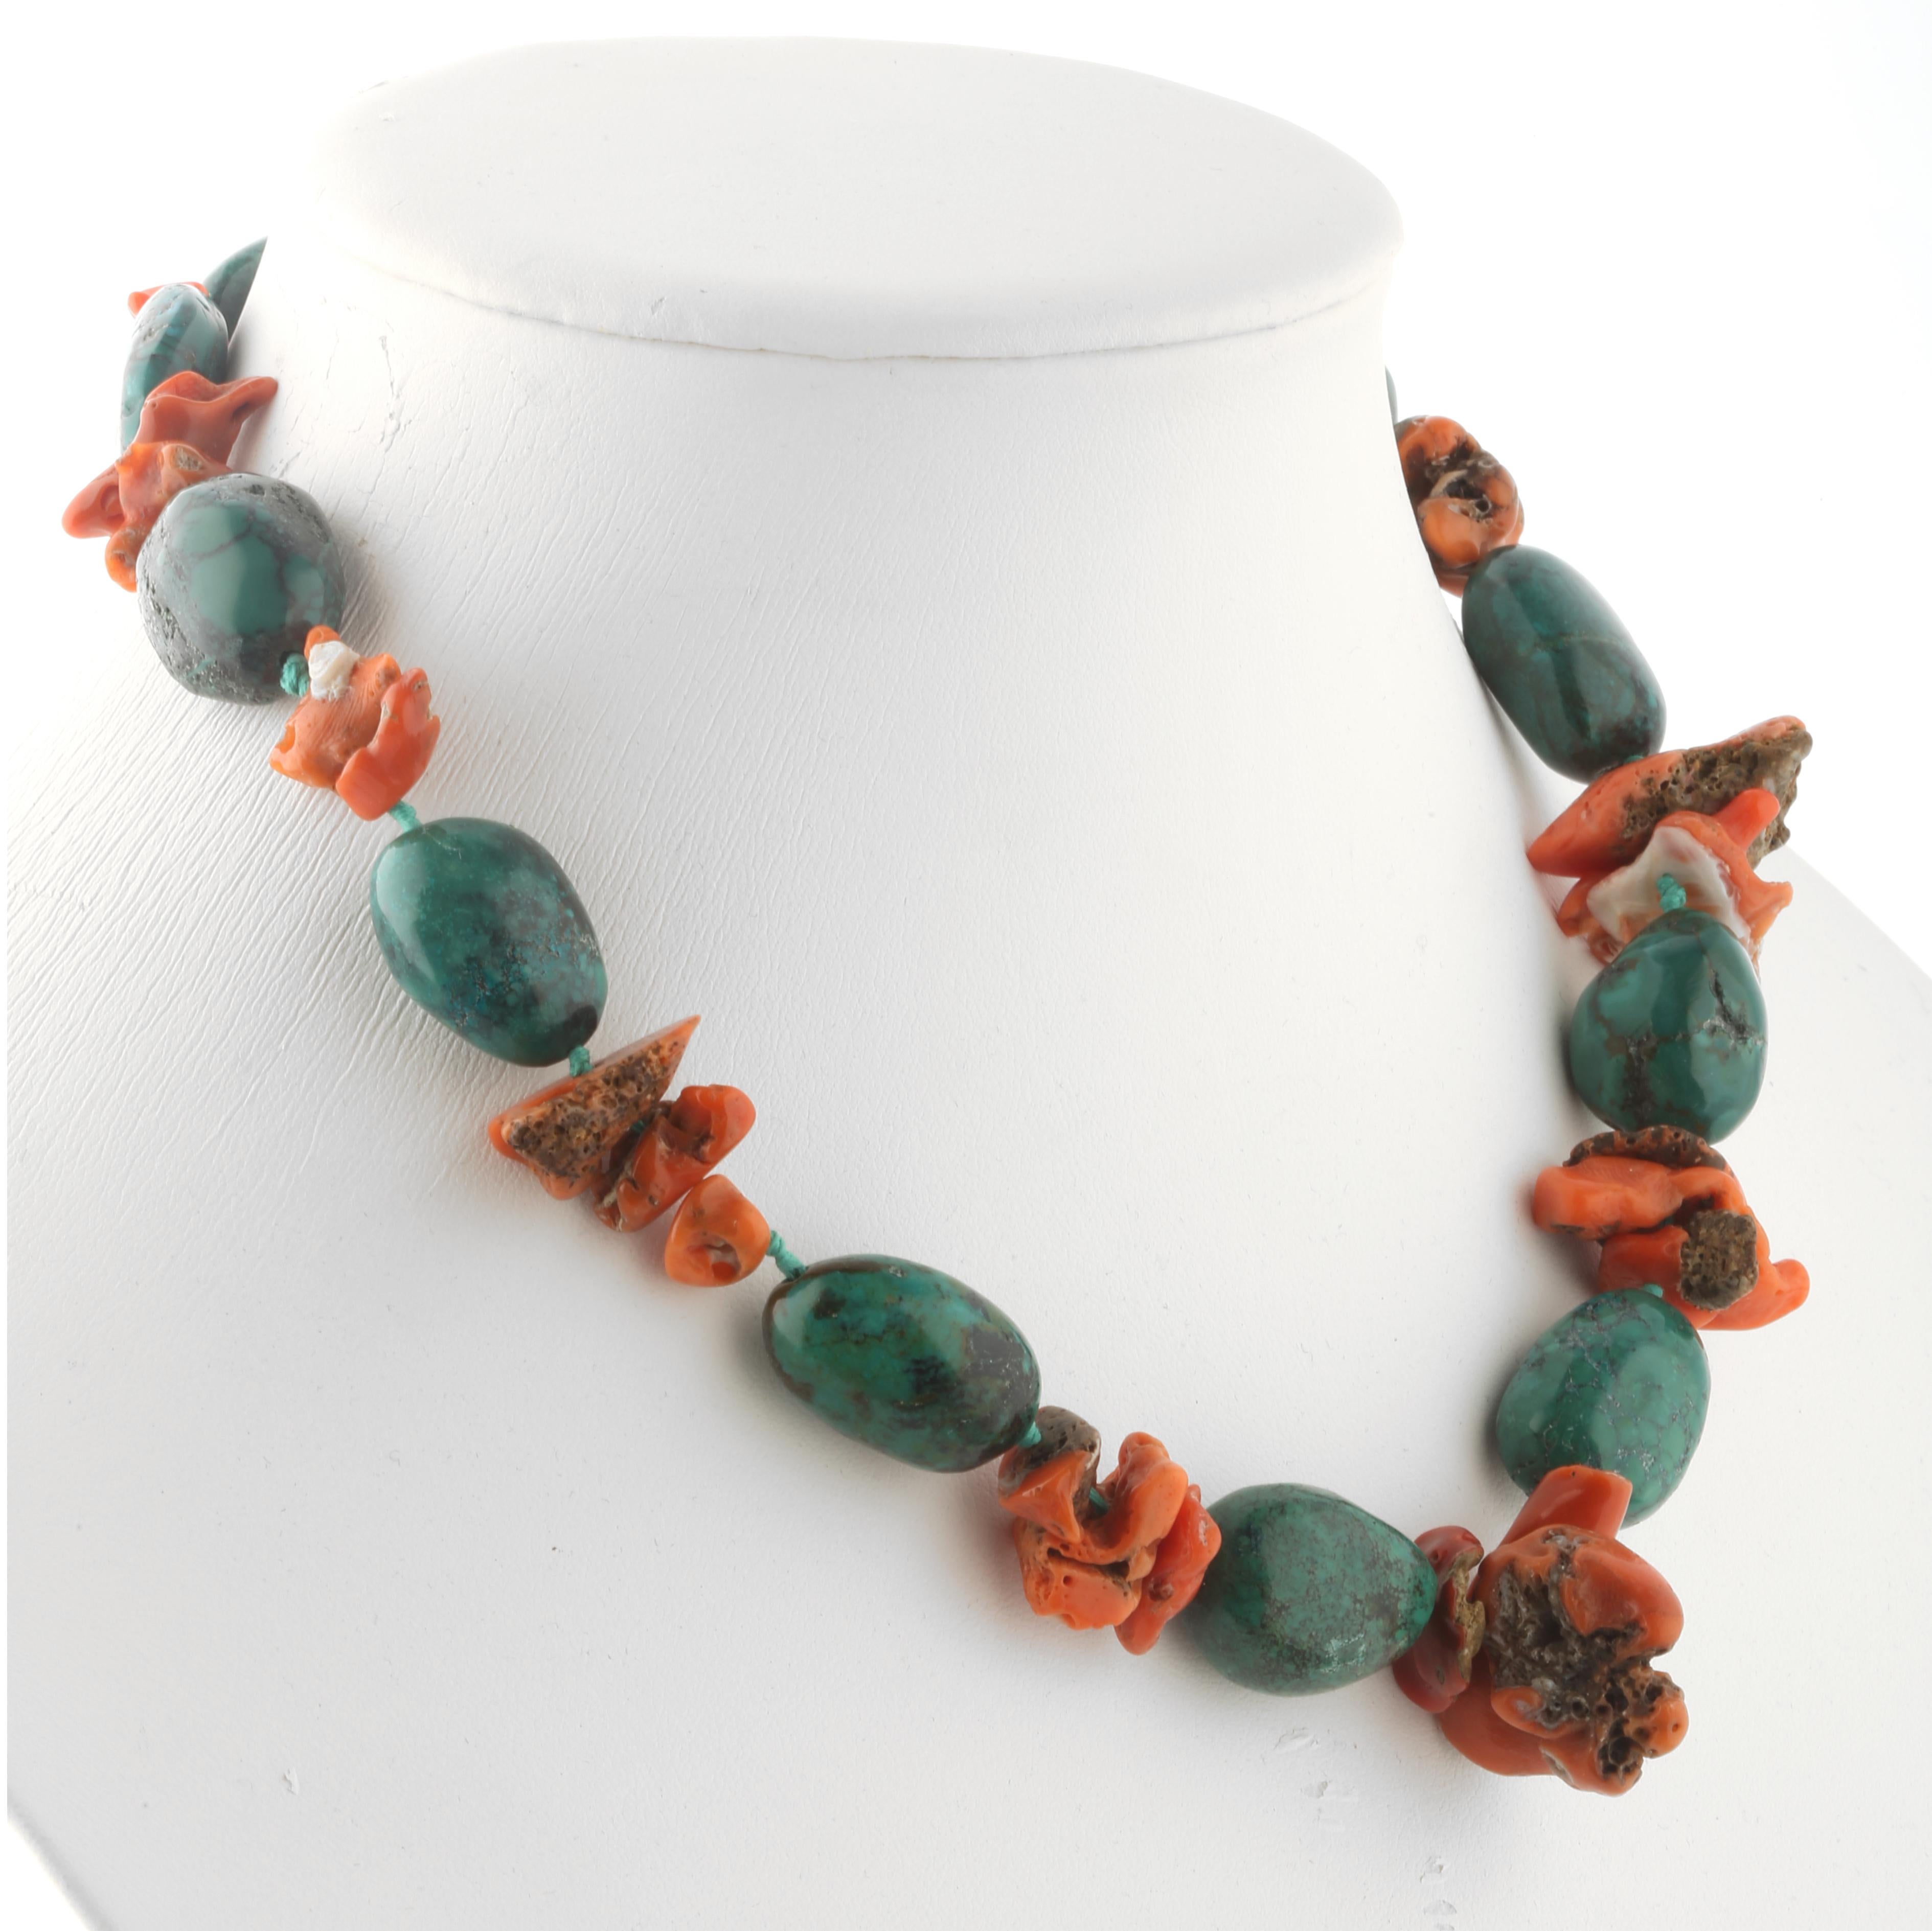 Sea inspired necklace with raw stones of coral and turquoise. Immerse yourself in the beauty of this uniquely designed necklace with natural stones full of life and color. A Hawaiian inspirational jewel which will match any beach glamorous